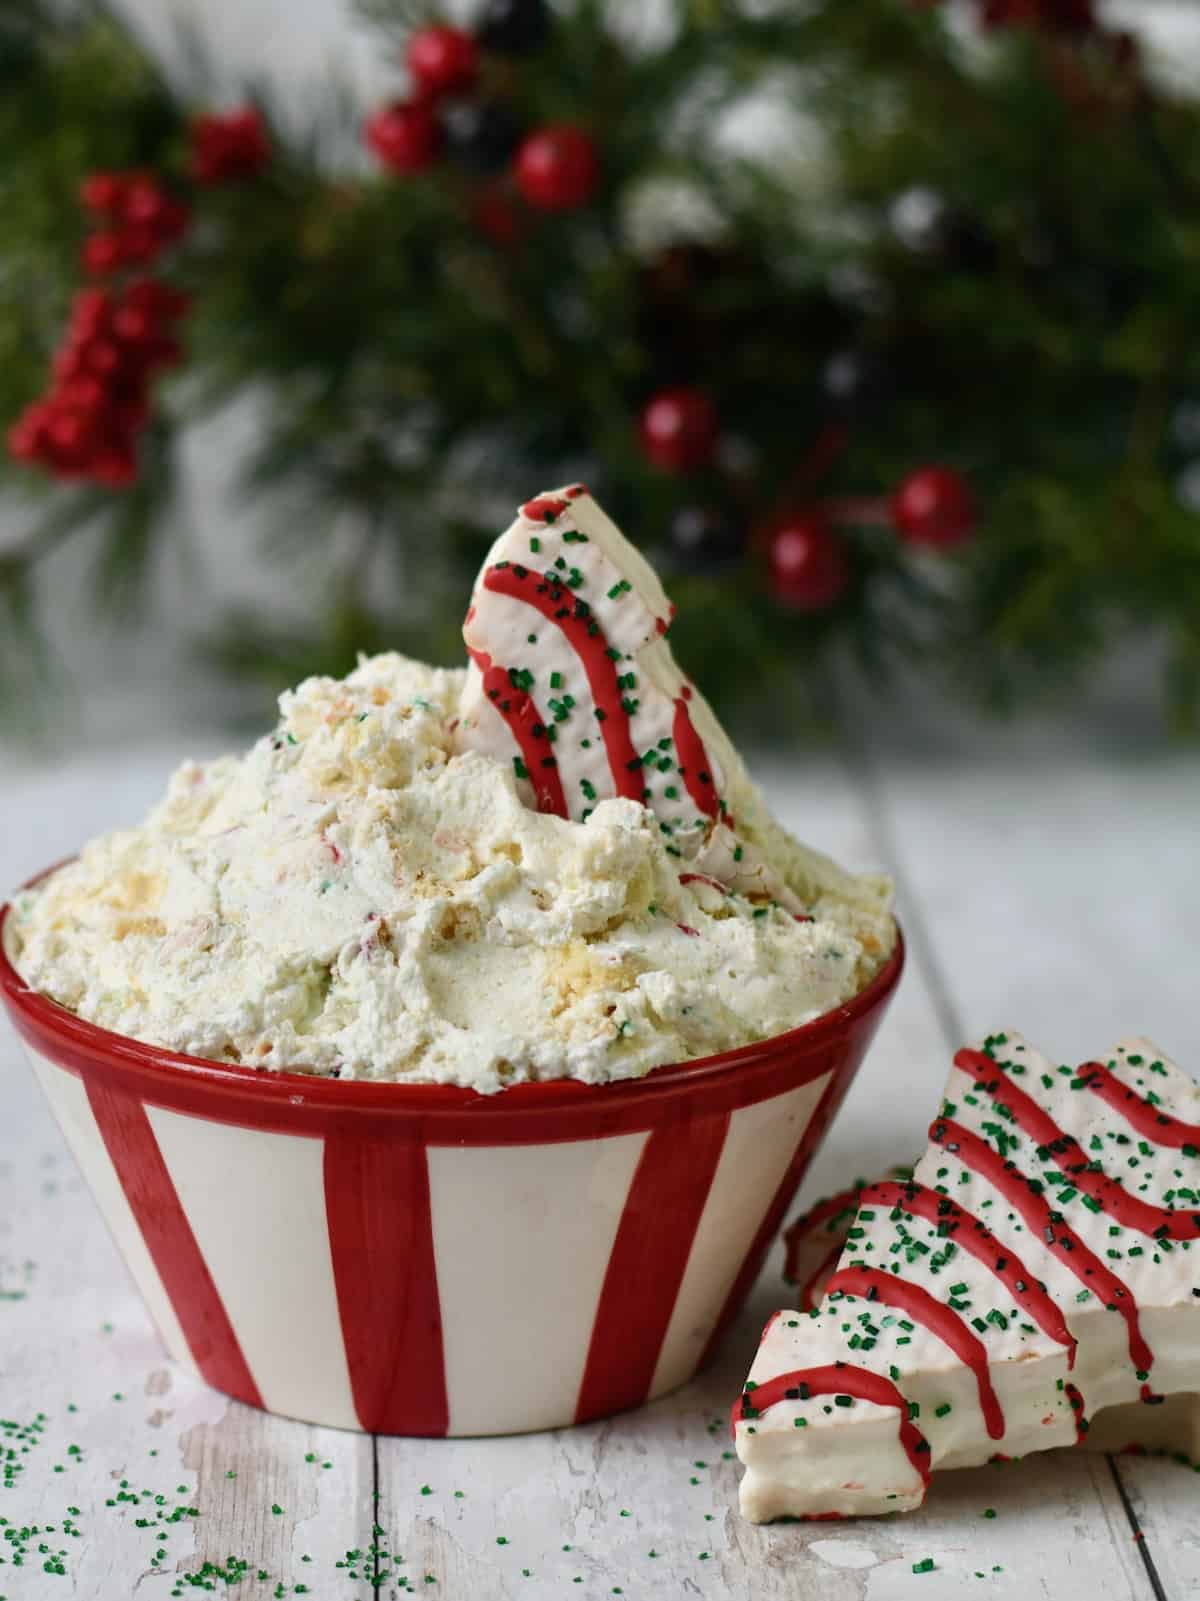 Little Debbie Christmas tree cake sticking out of red striped bowl of dip with tree cake on white wood surface and green Christmas tree in background..